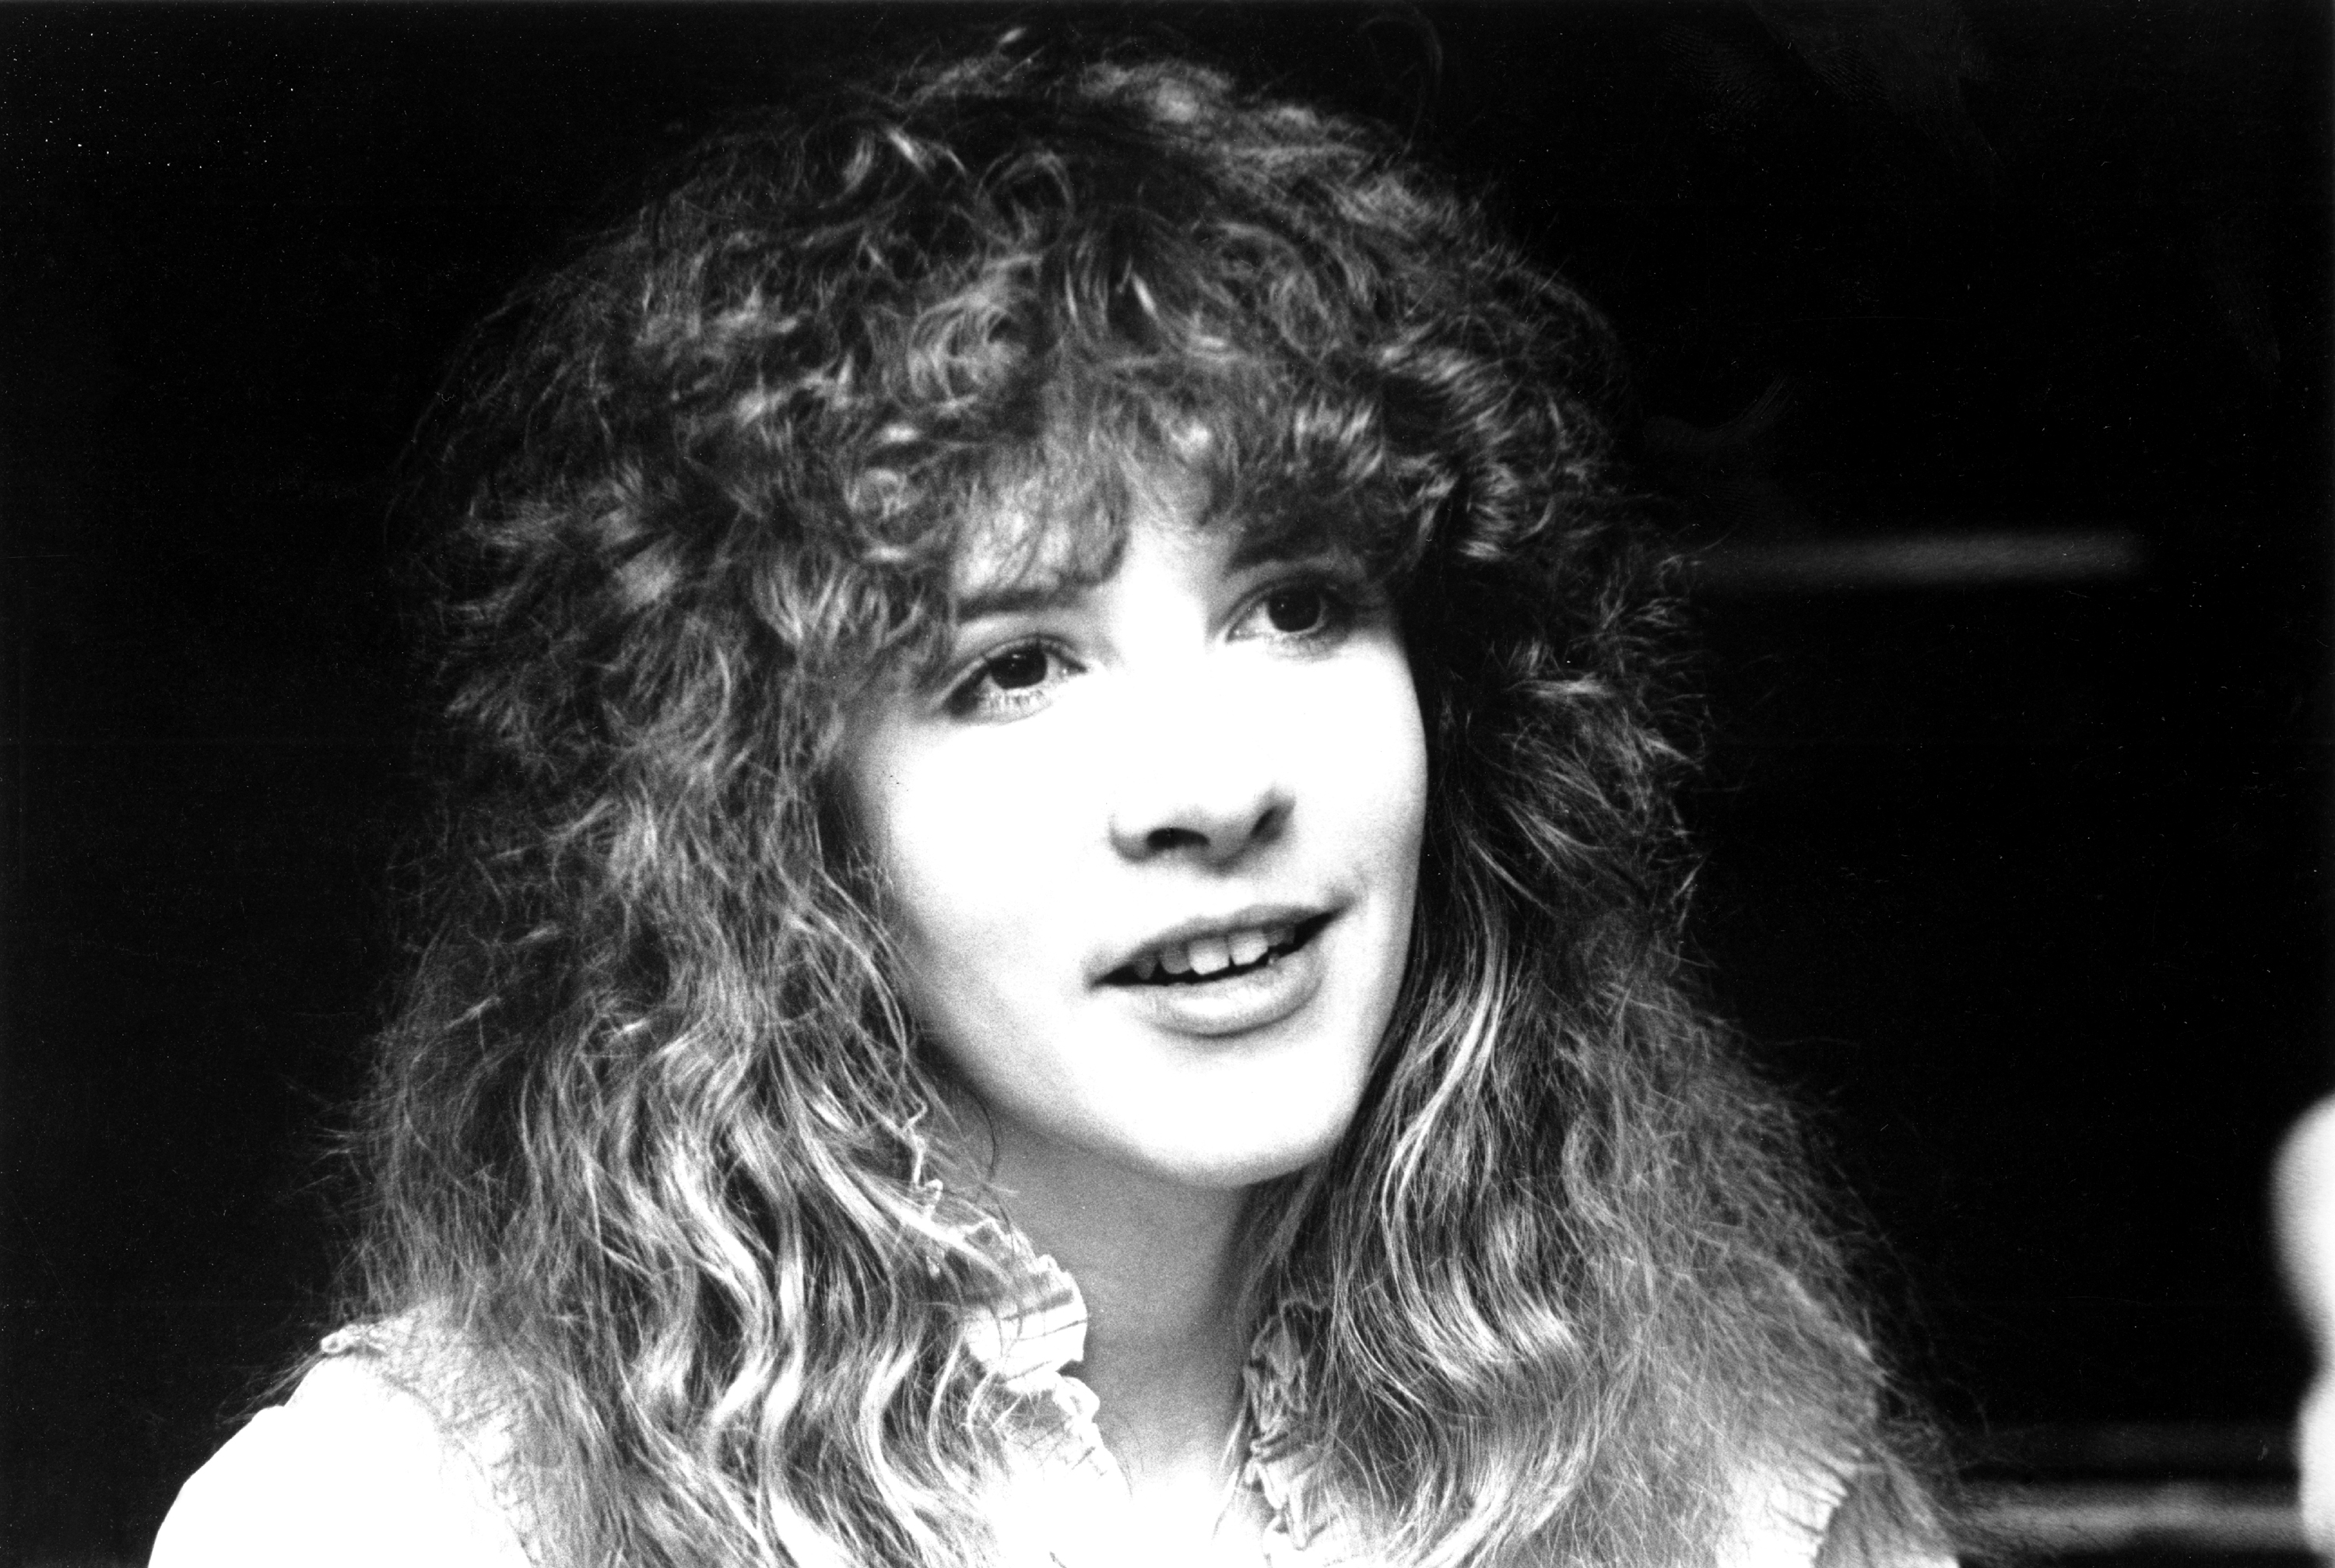 A  black and white photo from the '70s of Stevie Nicks. She had not yet joined Fleetwood Mac.